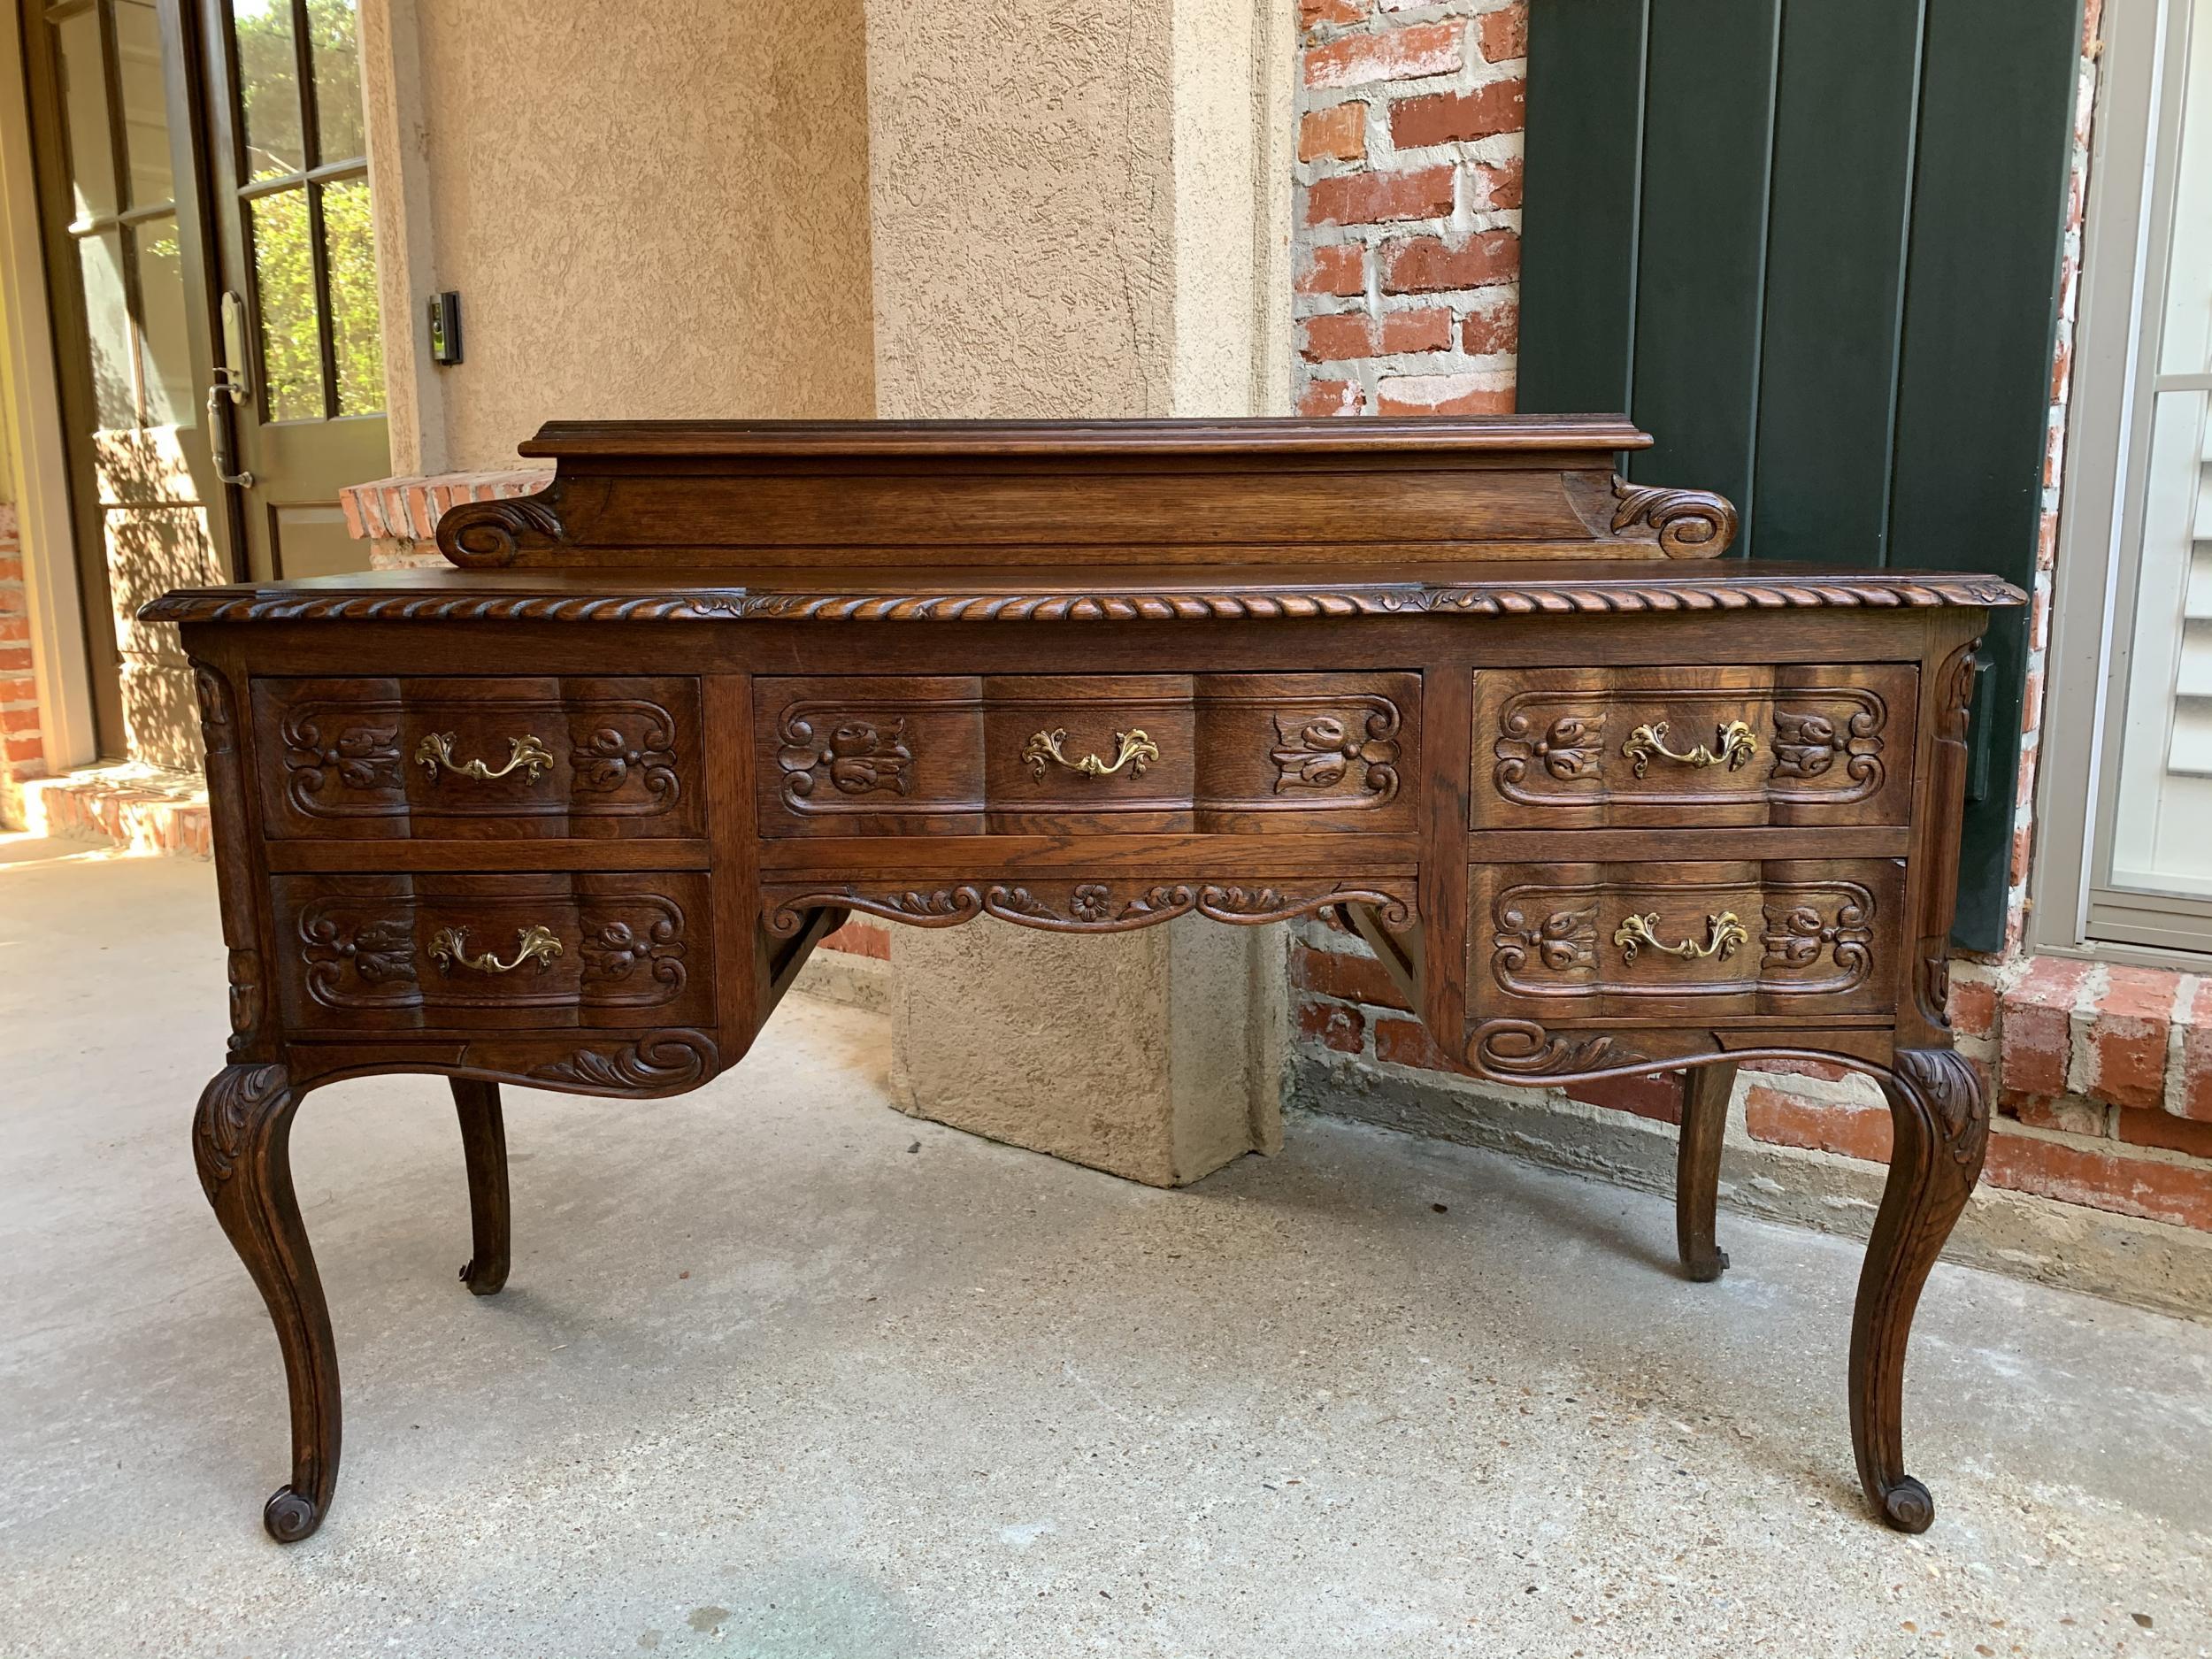 ~Direct from France ~
~Lovely and large, this antique French carved oak desk will add French style to any room!~
~Quintessential French Louis XV style~
~Large desk top has a serpentine edge, beveled and carved, that provides abundant room for